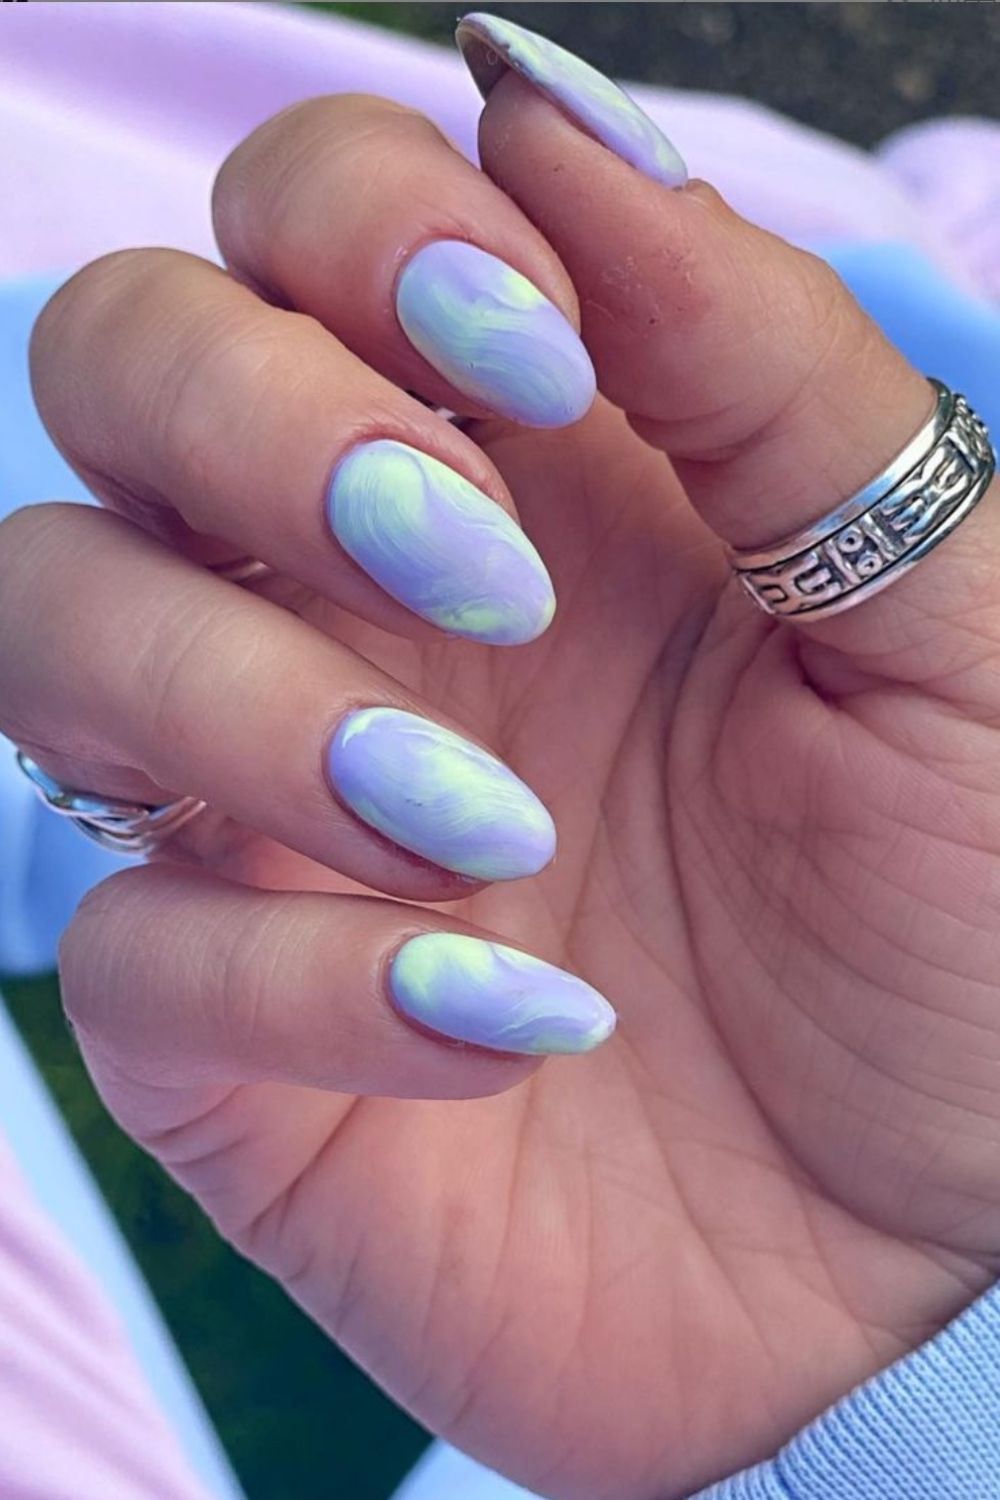 65 Hottest Summer nails colors 2021 trends to get inspired